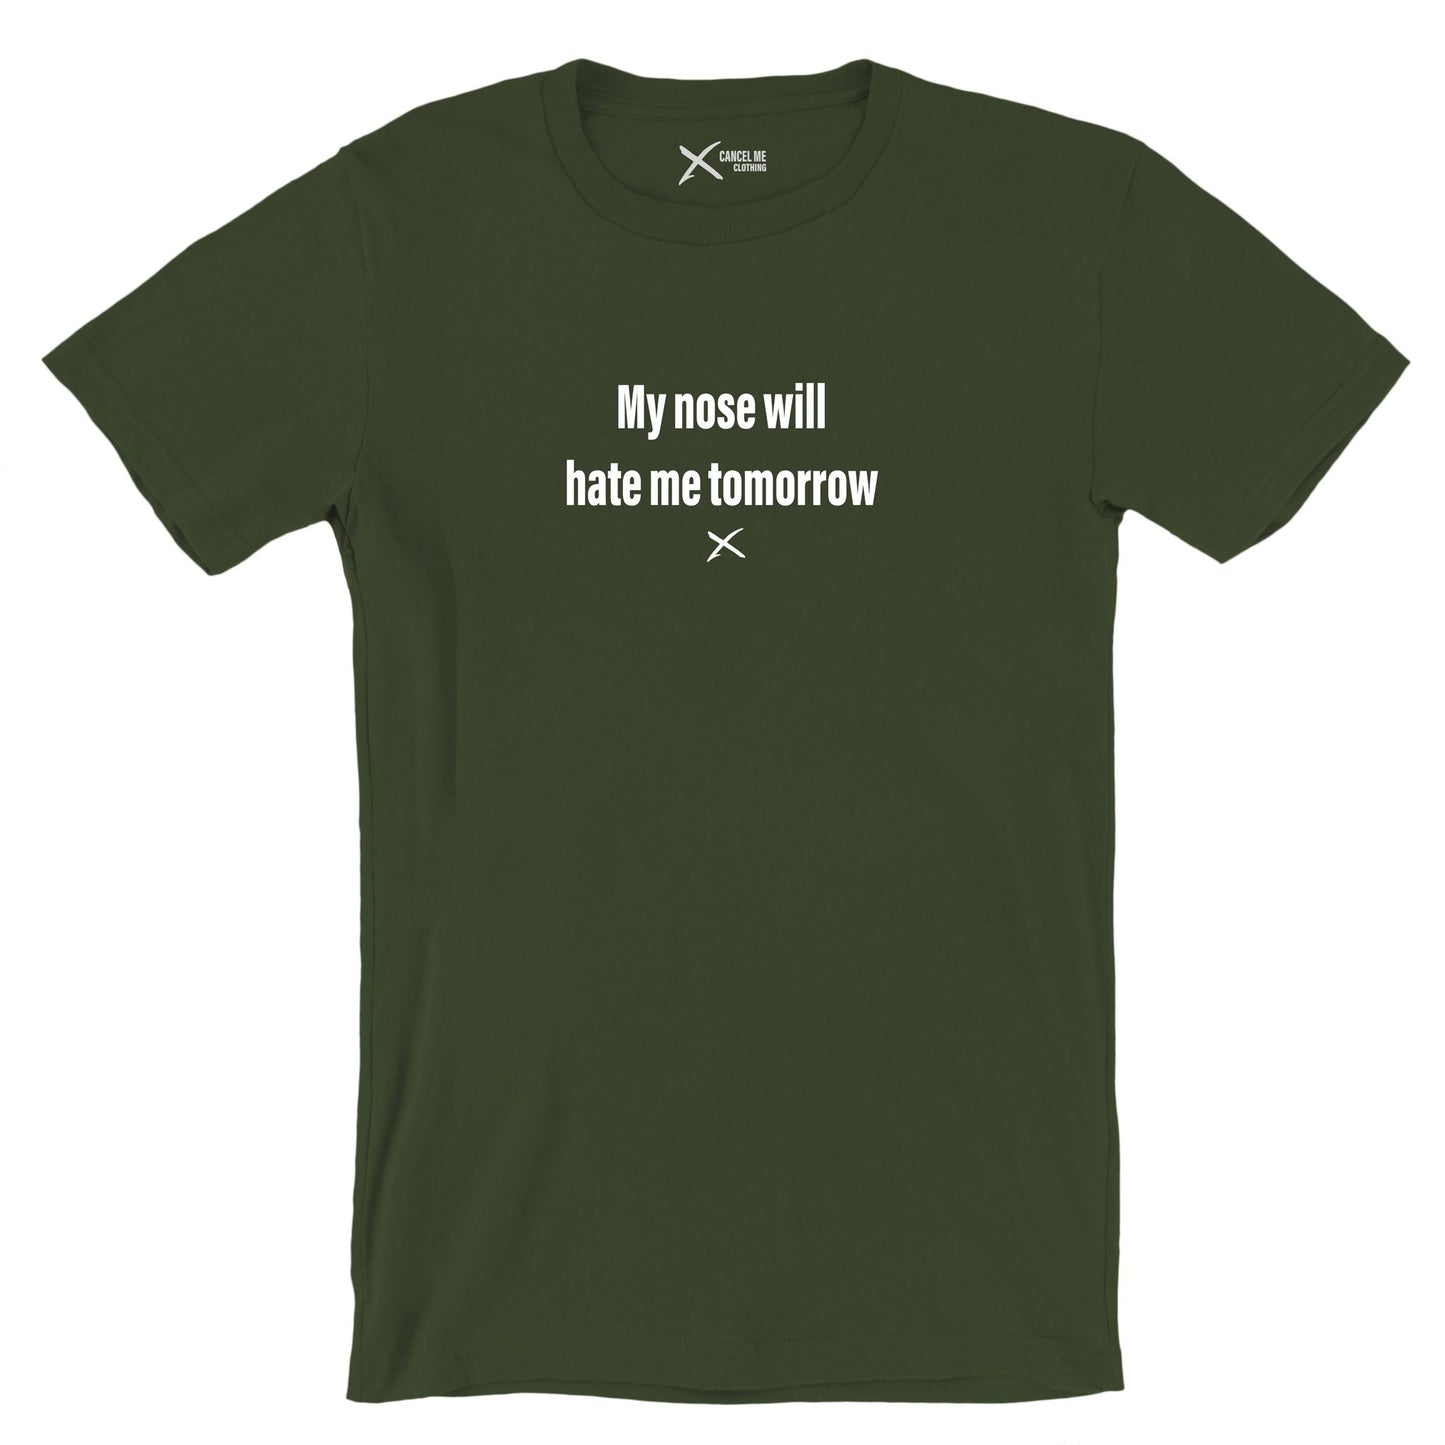 My nose will hate me tomorrow - Shirt